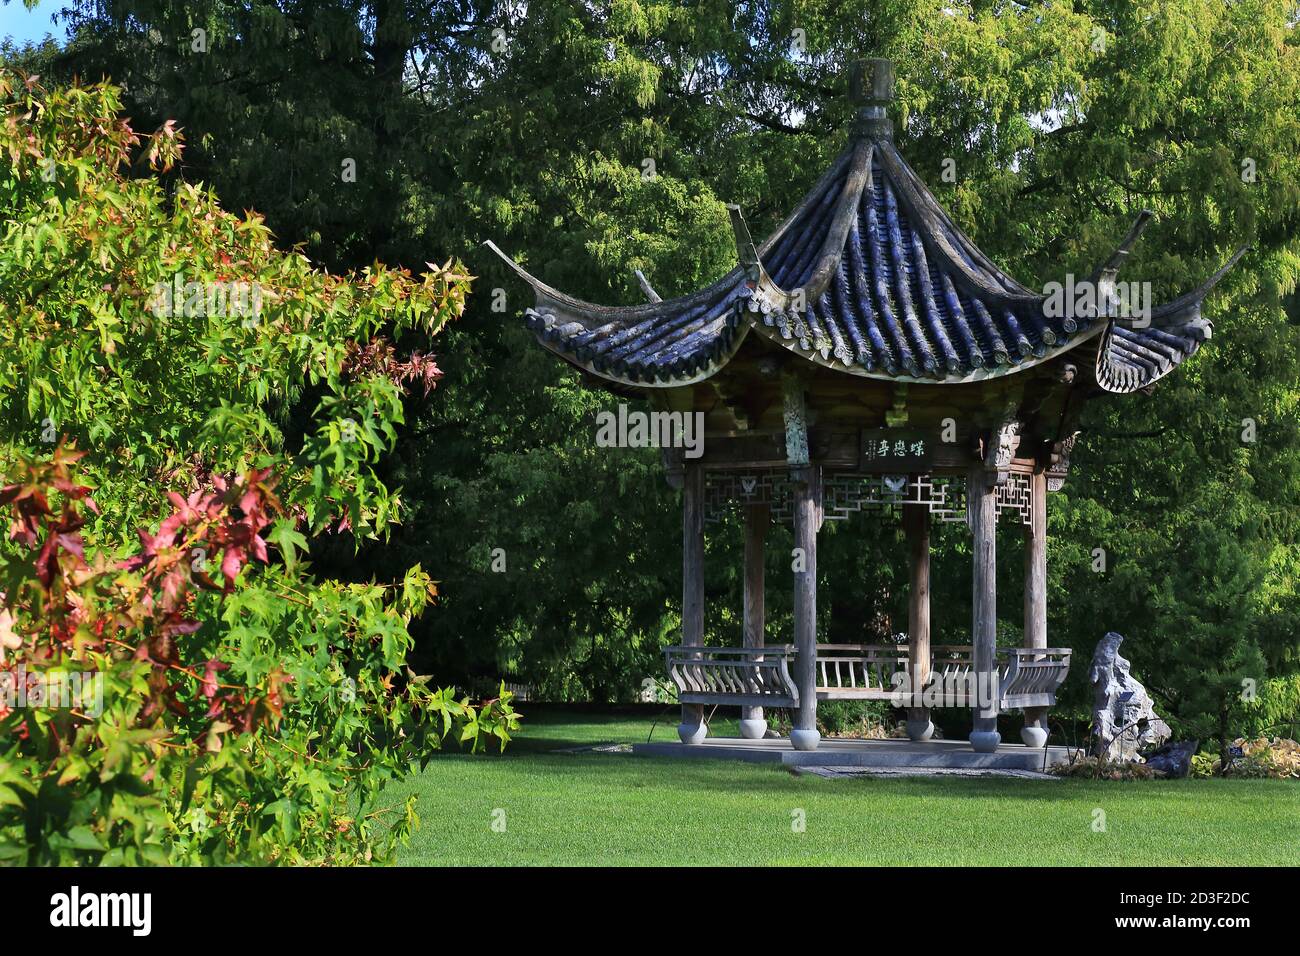 The Chinese Pavilion in the Seven Acres Garden at RHS Wisley in Surrey, England Stock Photo